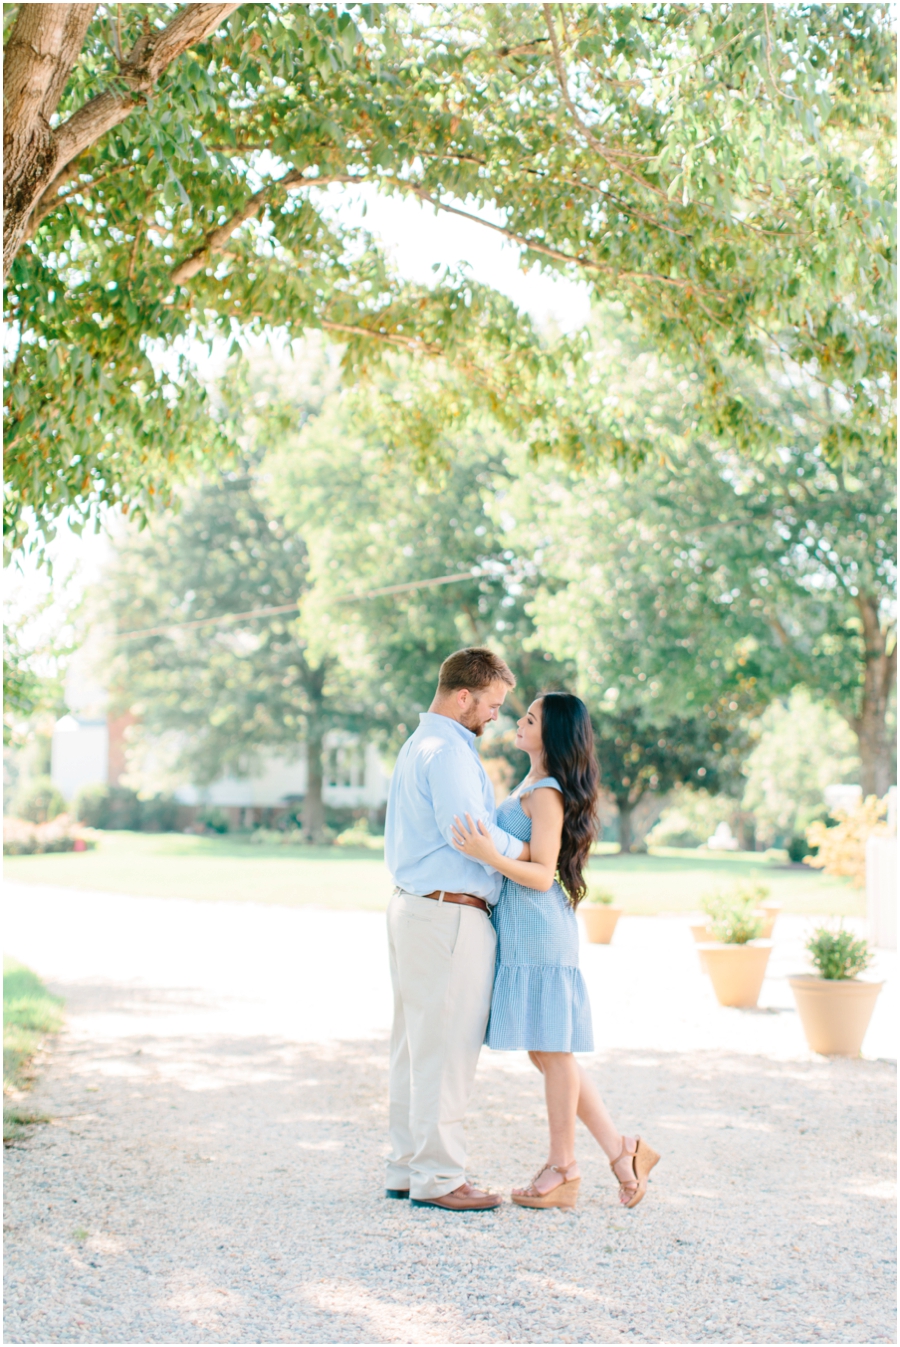 New Kent Winery Engagement Session, Estates at New Kent Winery, Nicki Metcalf Photography, Virginia Photography